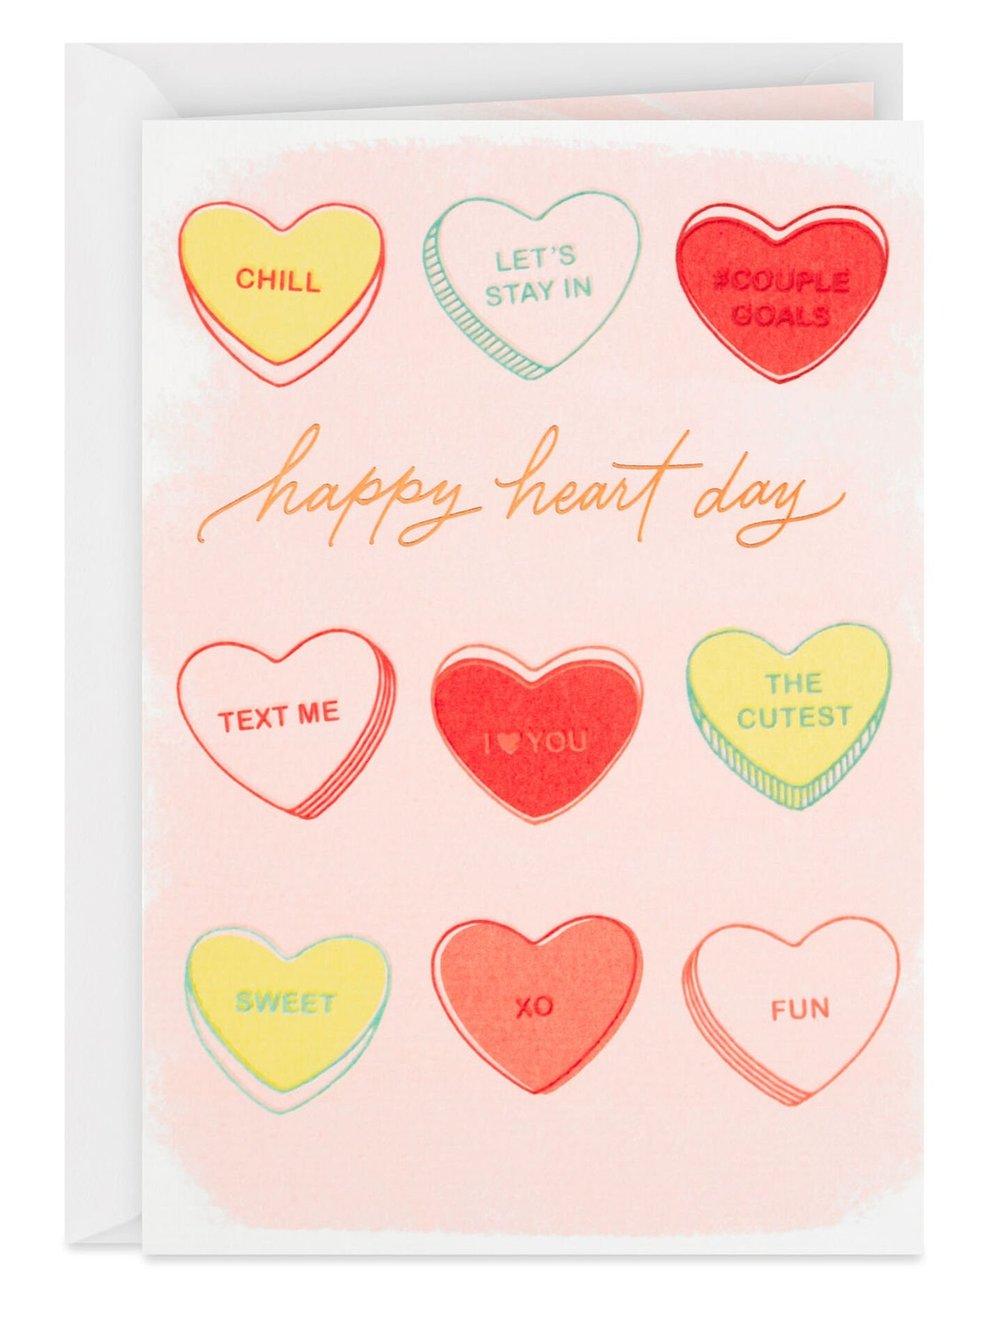 Conversation Hearts Valentine's Day Candy Bar Wrappers - Announce It!